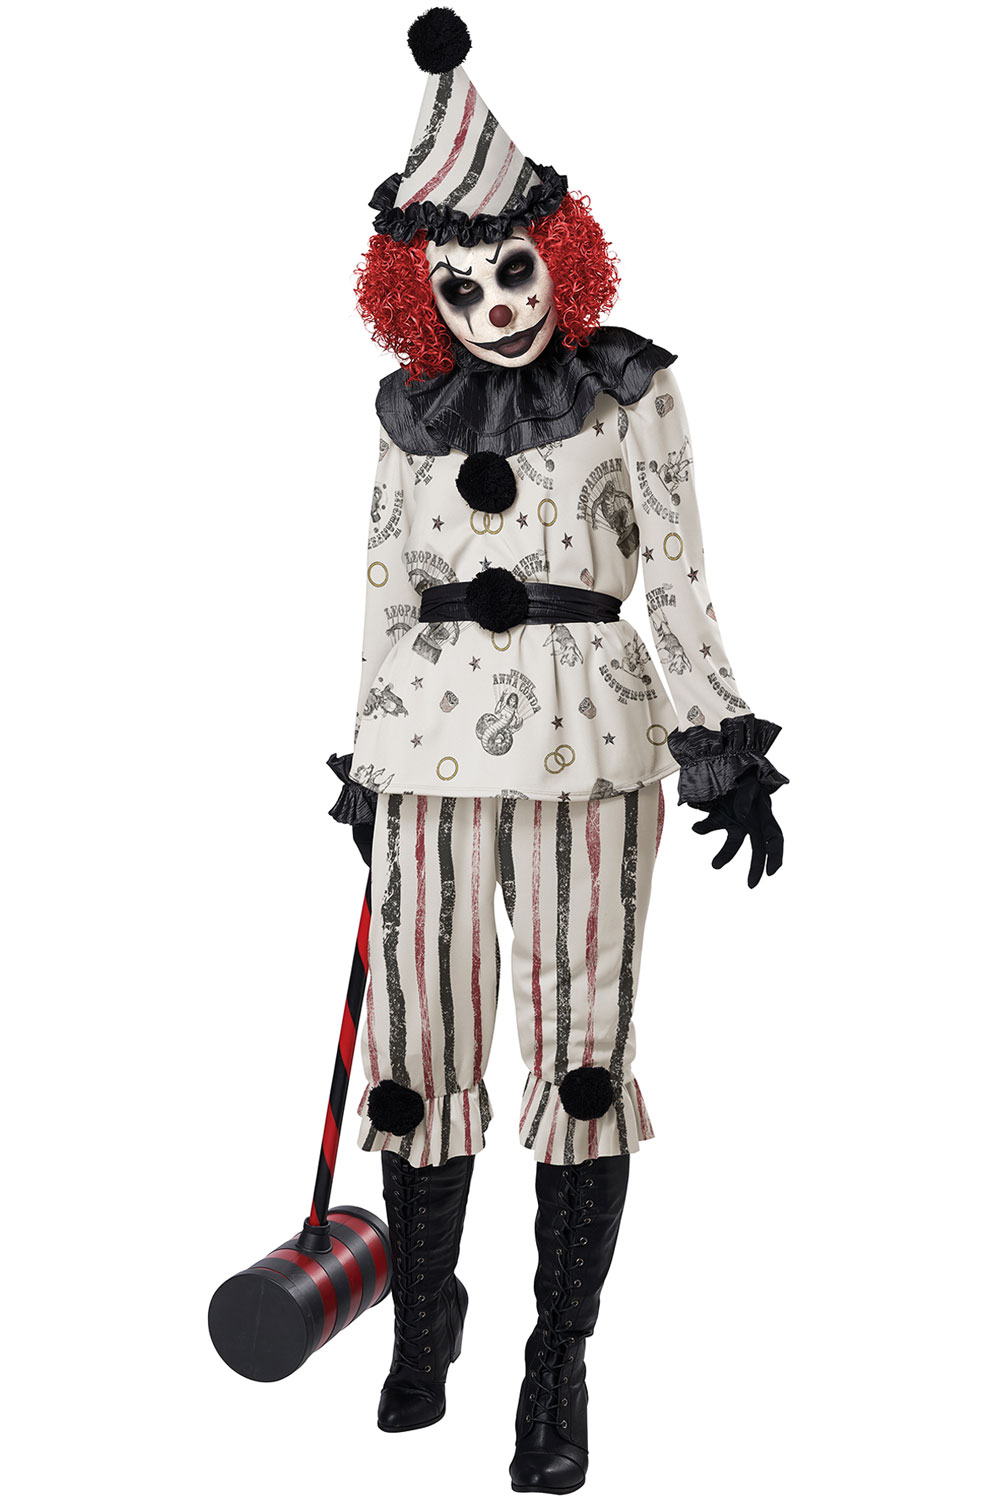 California Costume Vintage Creeper Clown Adult Women halloween outfit ...